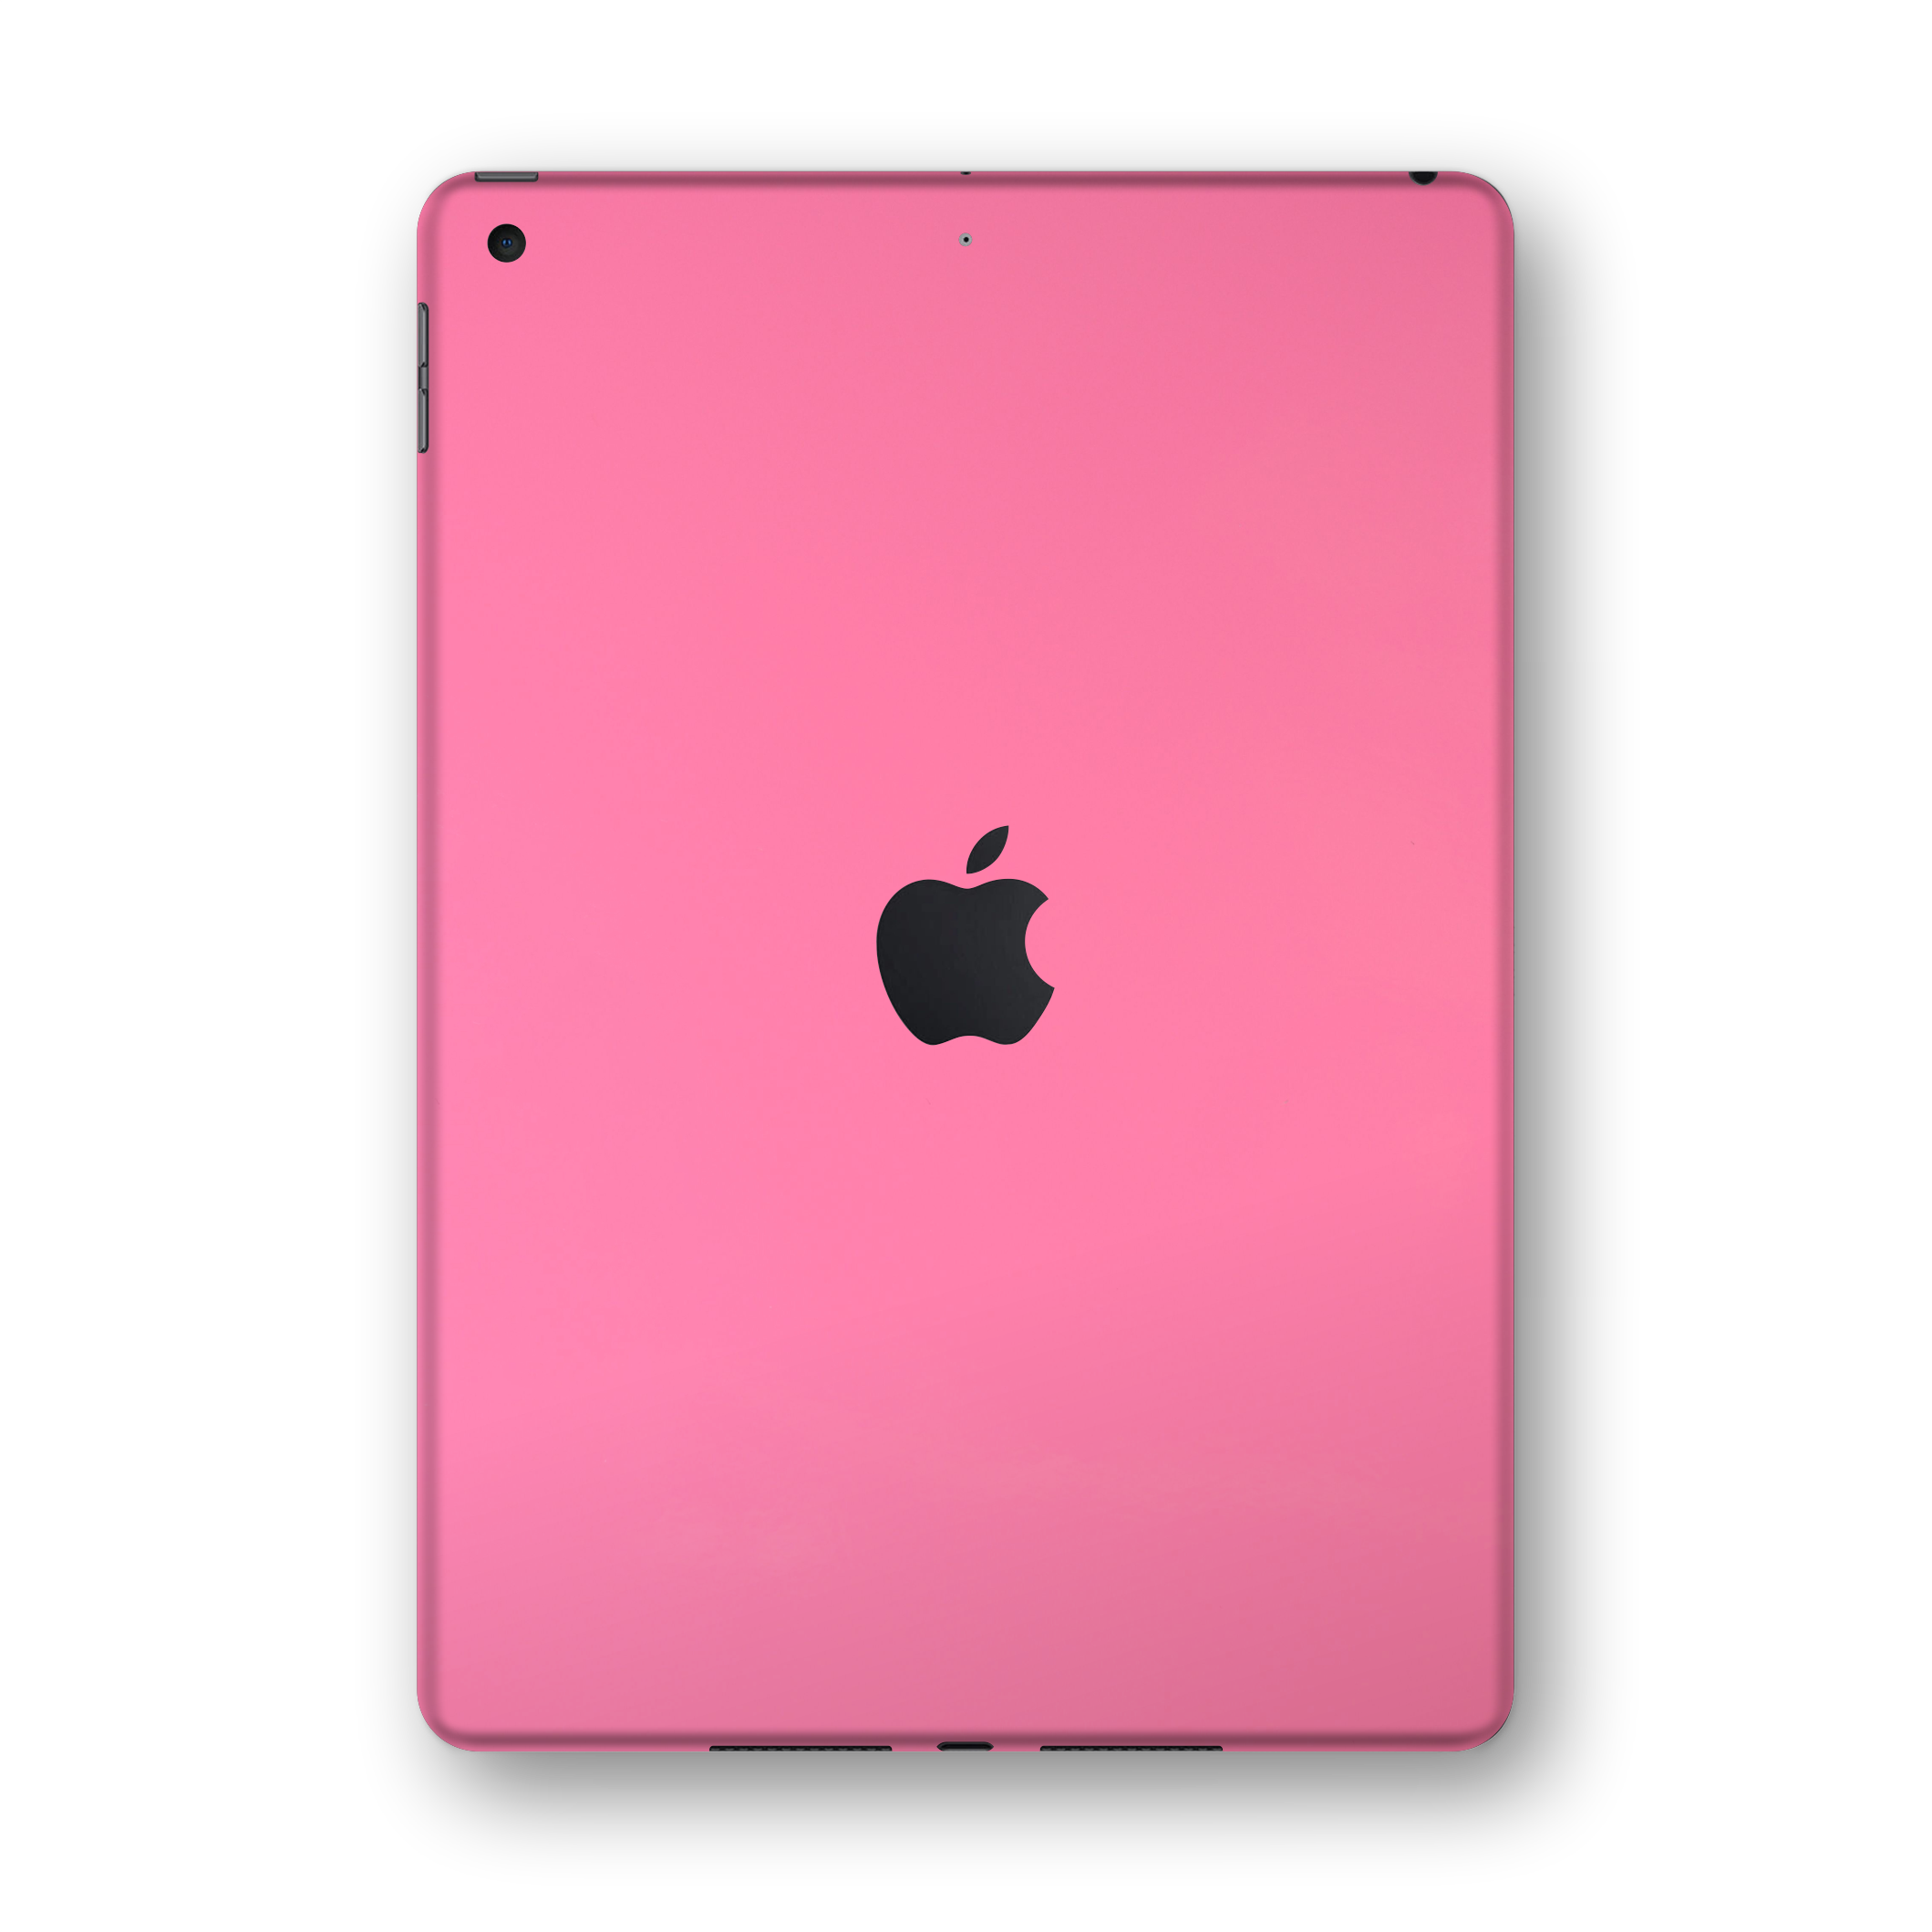 iPad 10.2" (8th Gen, 2020) Glossy 3M HOT PINK Skin Wrap Sticker Decal Cover Protector by EasySkinz